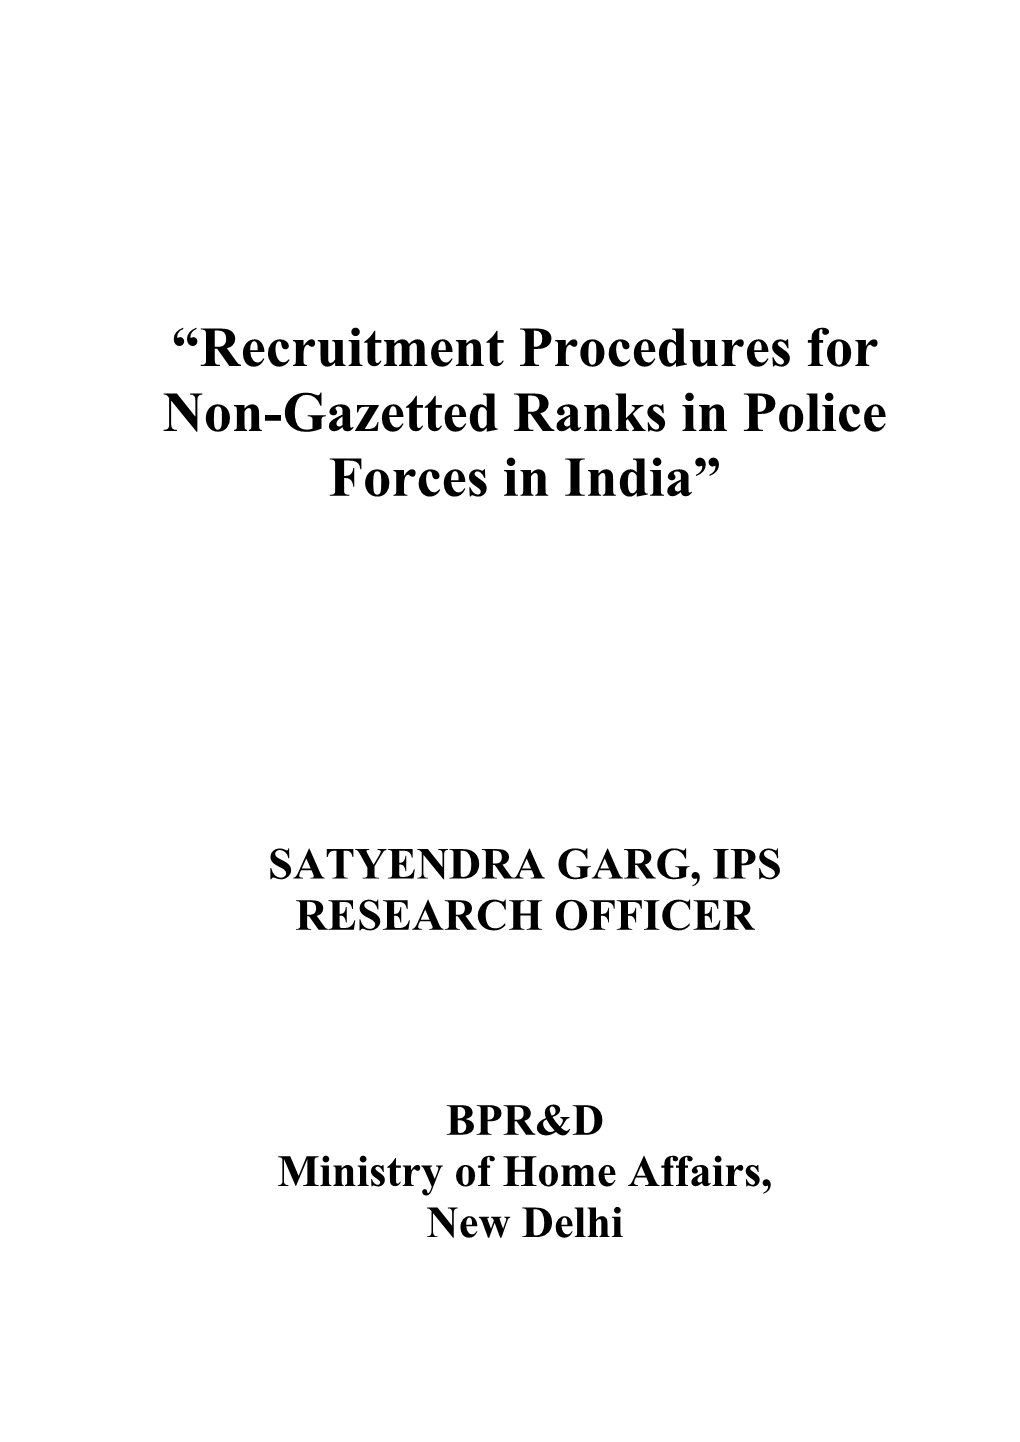 “Recruitment Procedures for Non-Gazetted Ranks in Police